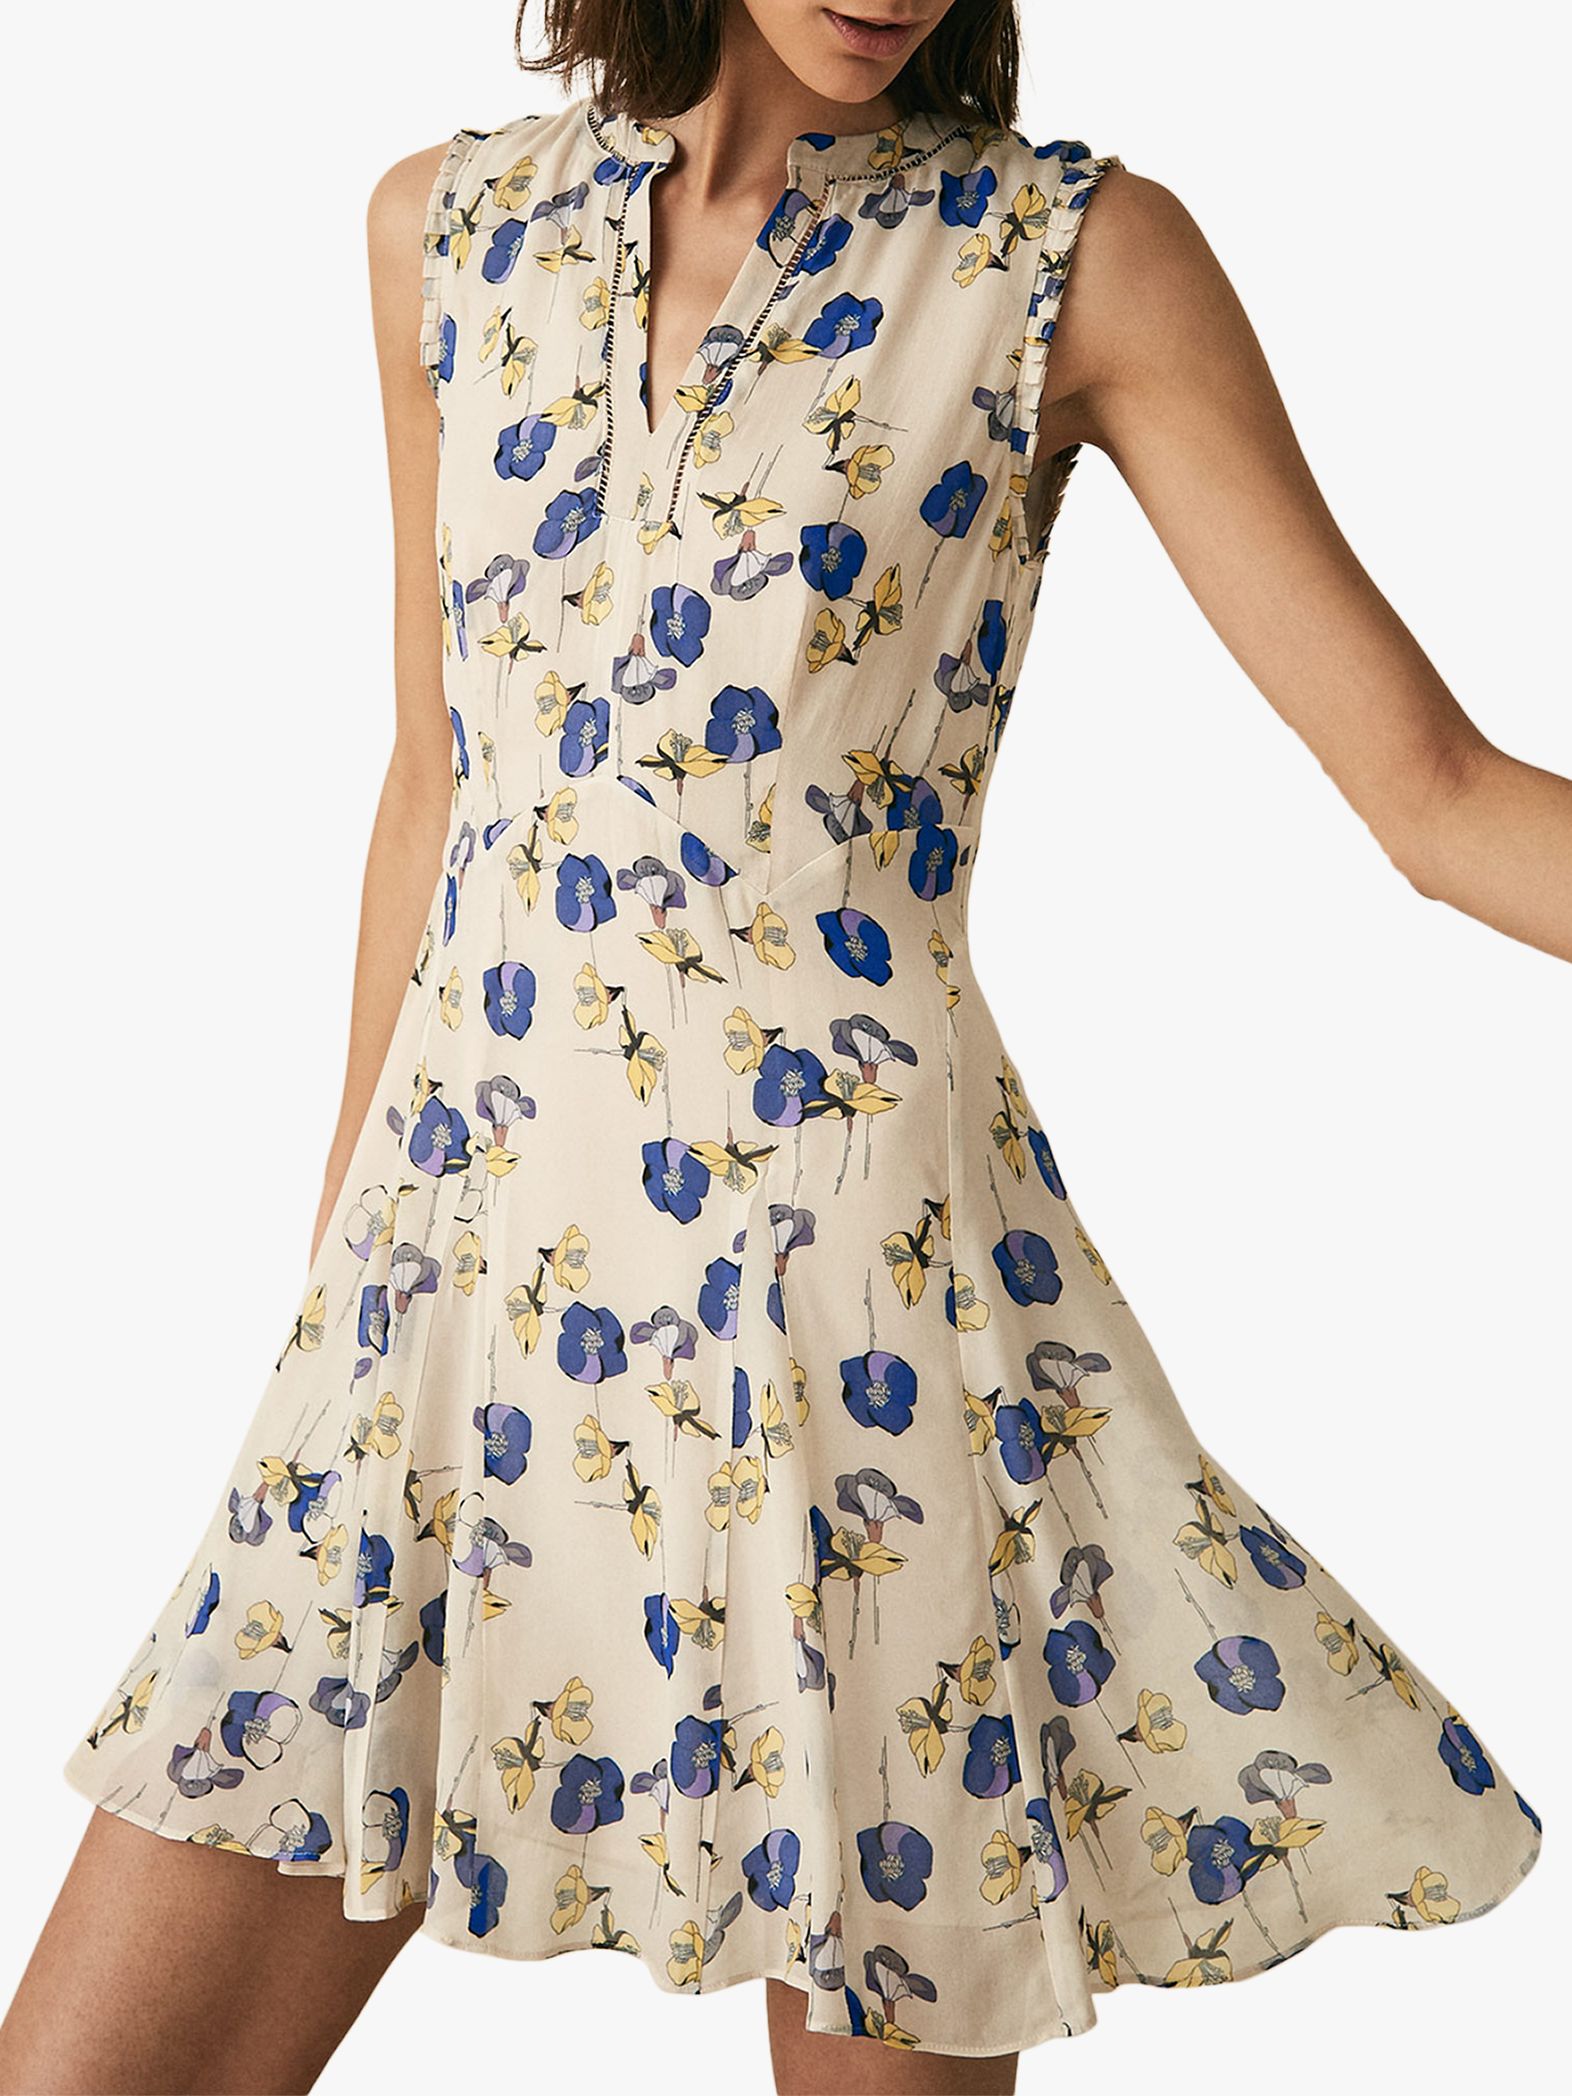 Reiss Mika Floral Dress, Blue/White at 